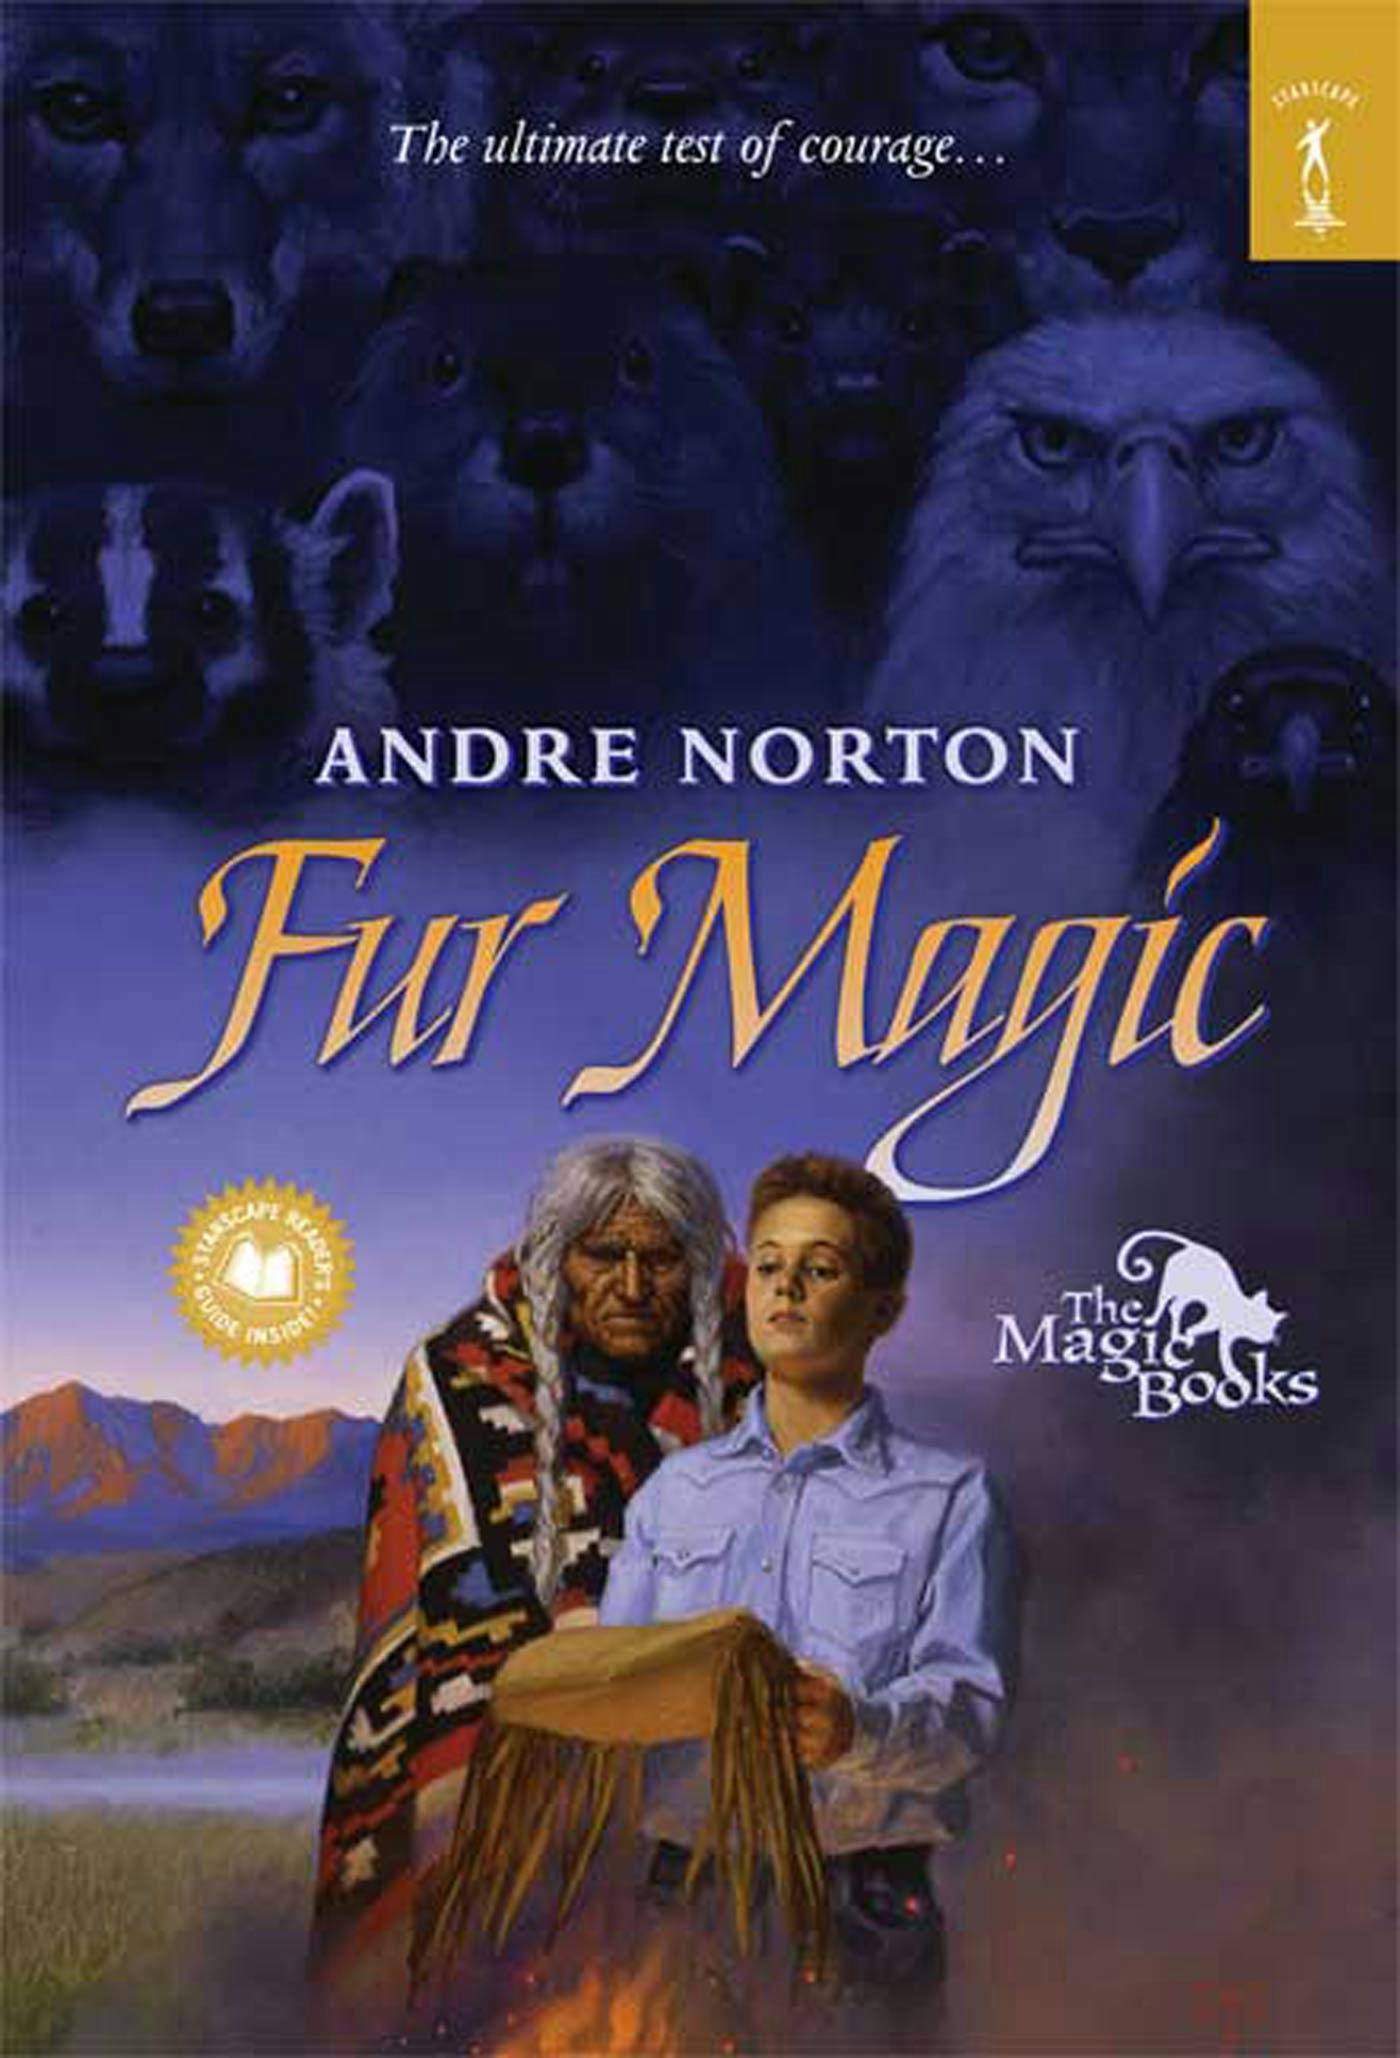 Cover for the book titled as: Fur Magic